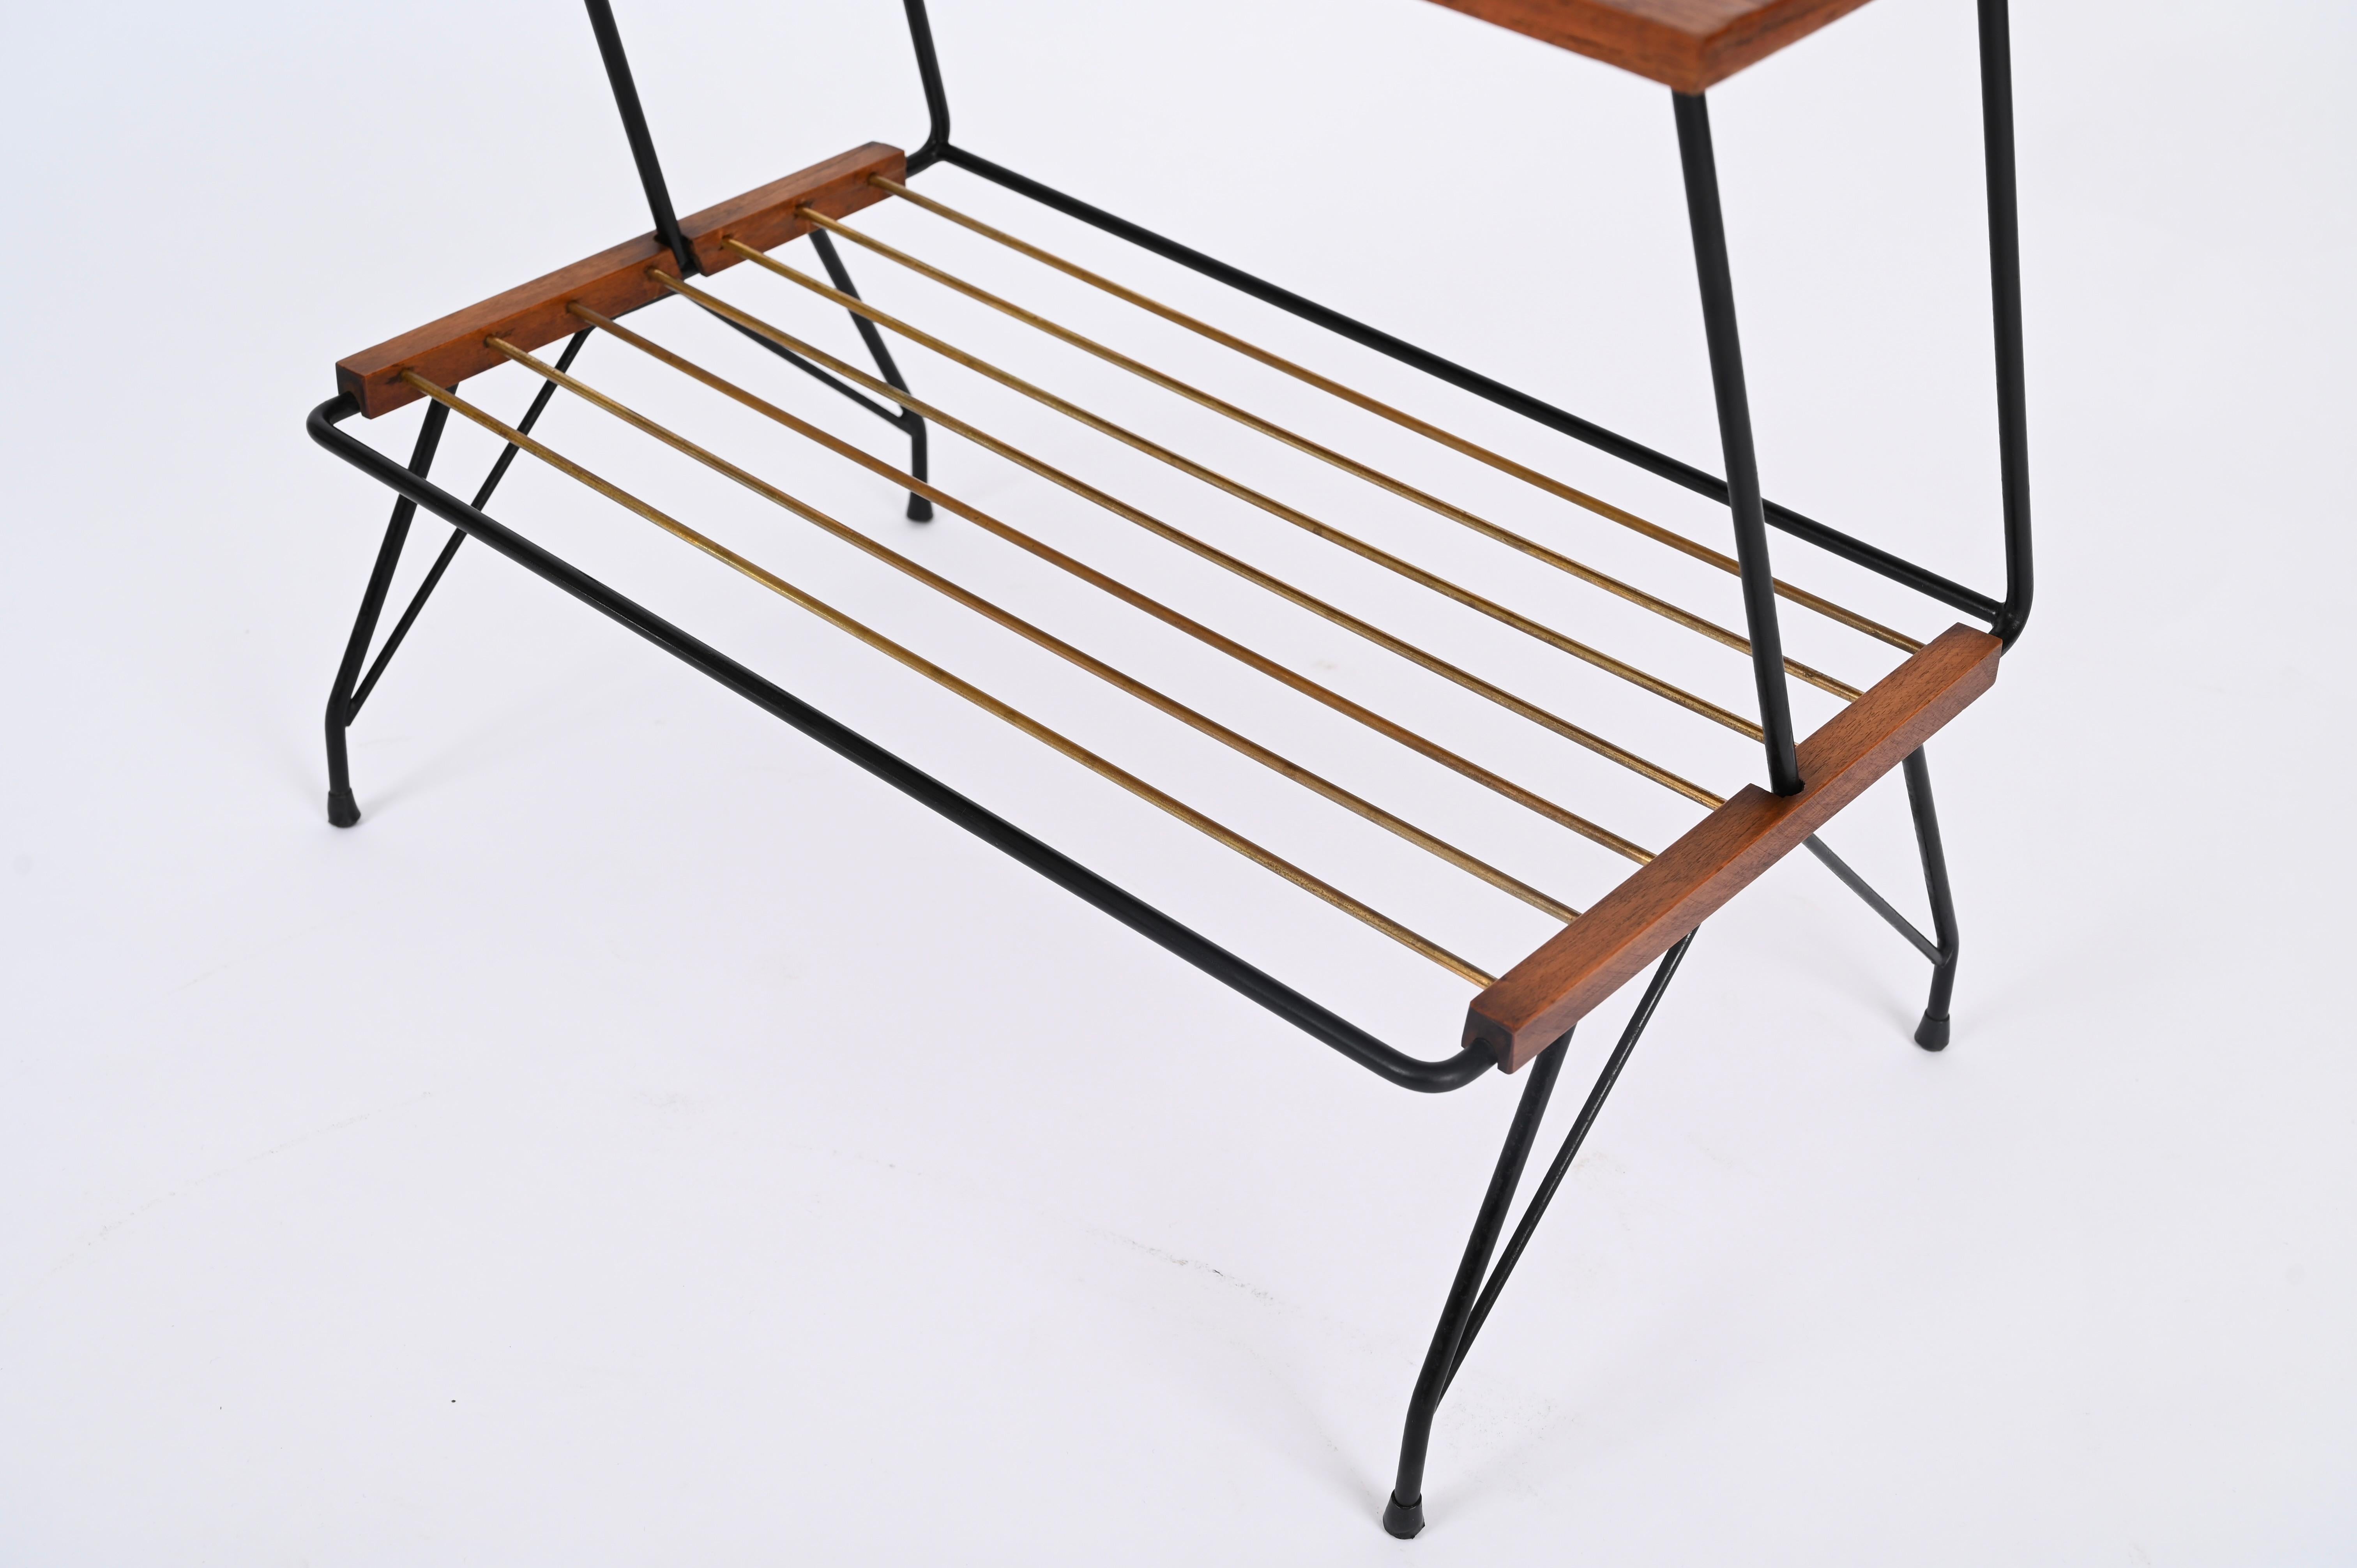 Metal Italian Side or Coffee Table with Brass Magazine Rack by Mobili Pizzetti, 1950s For Sale